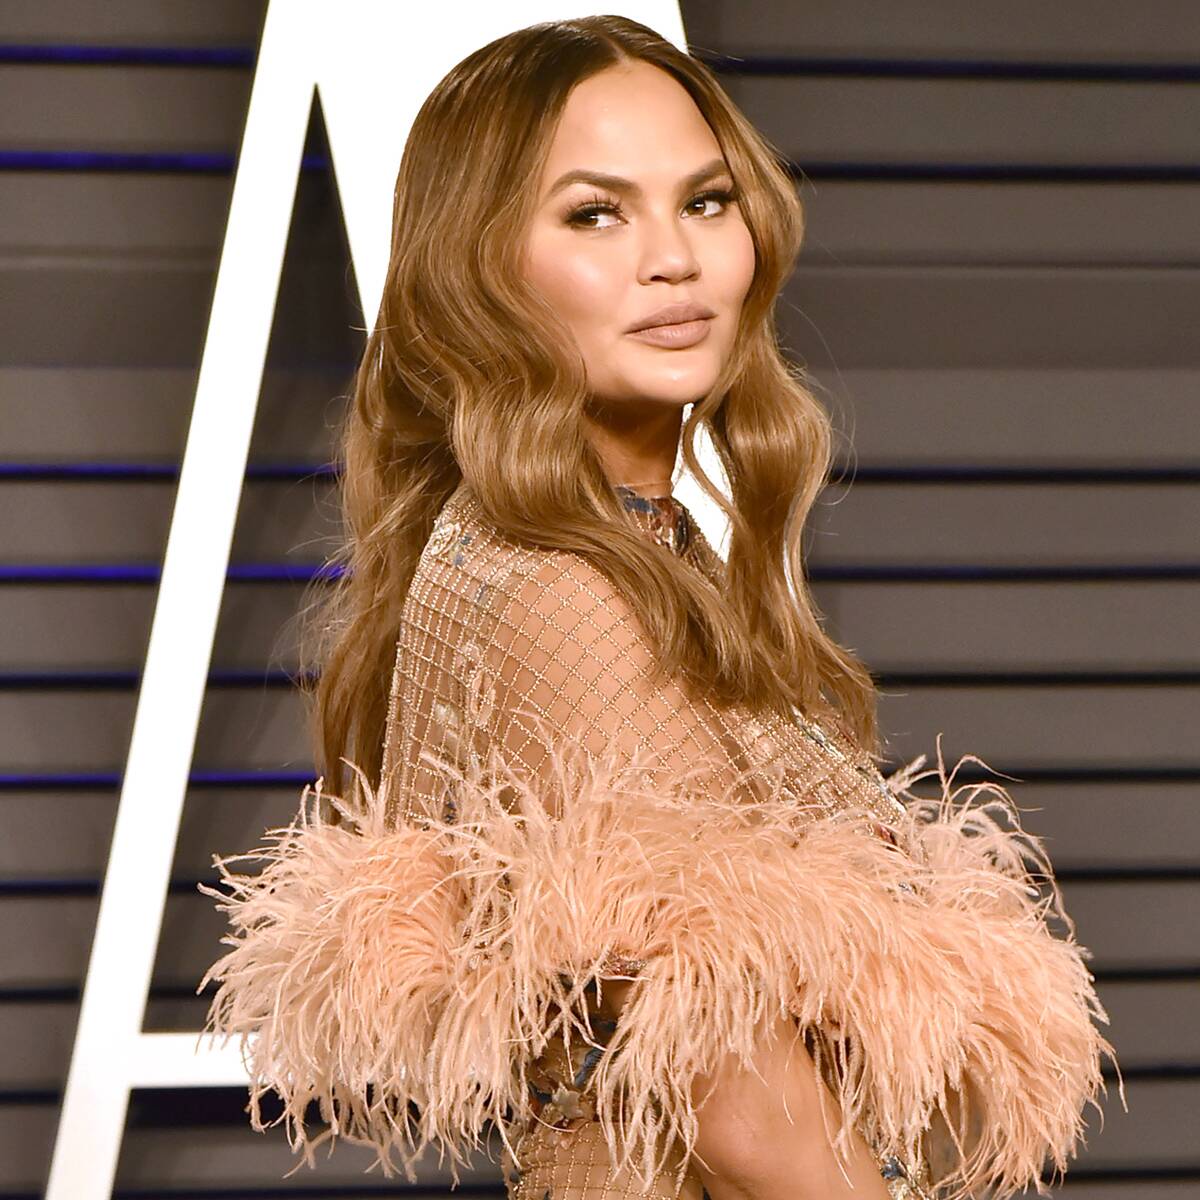 Chrissy Teigen Fires Back at Claims She Deletes Negative Comments From Her Social Media Posts